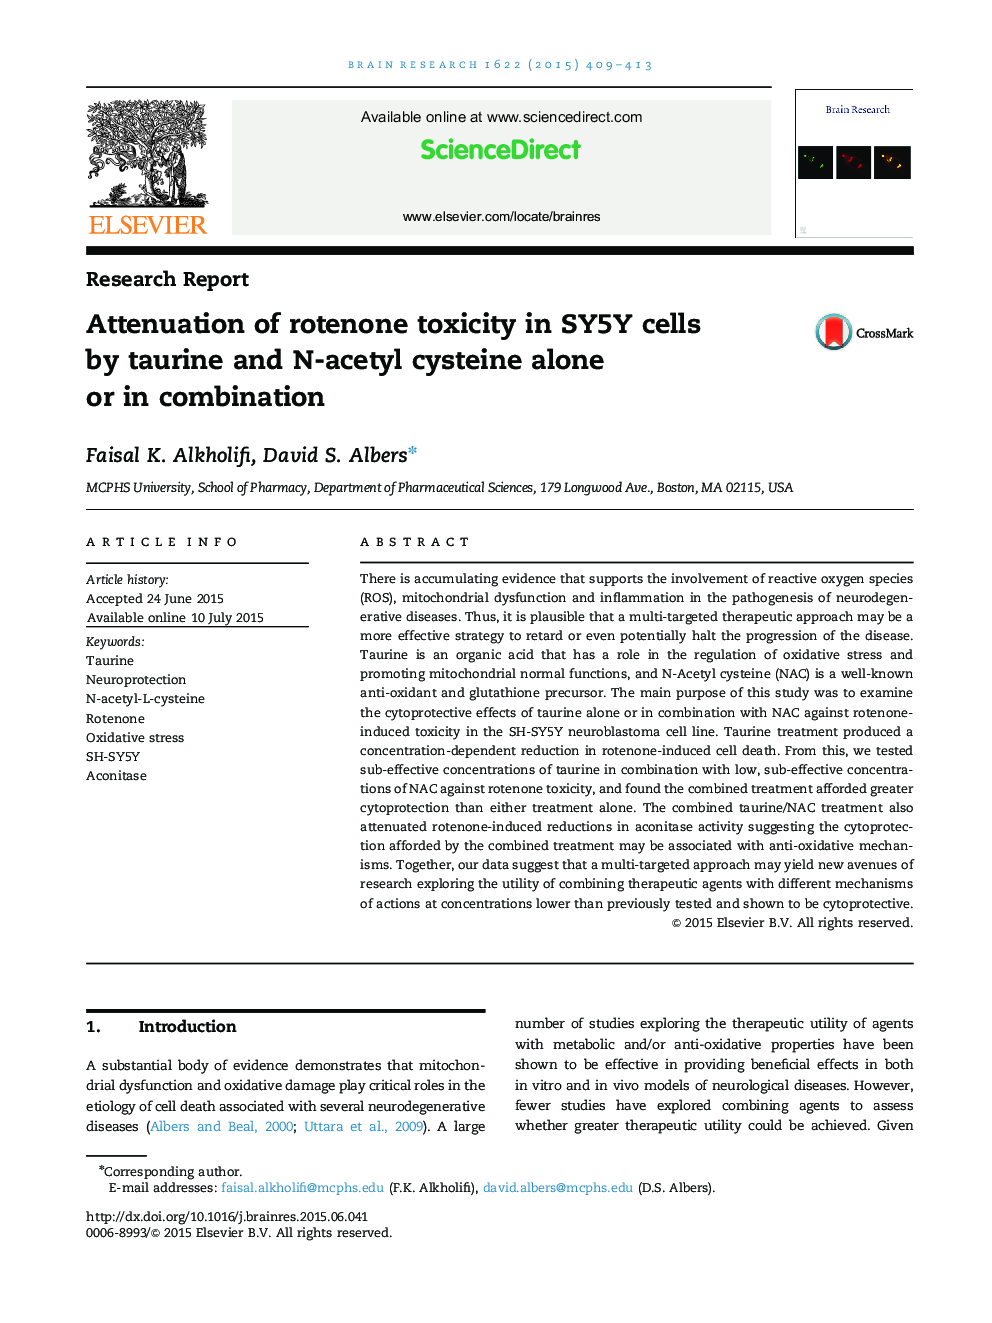 Research ReportAttenuation of rotenone toxicity in SY5Y cells by taurine and N-acetyl cysteine alone or in combination